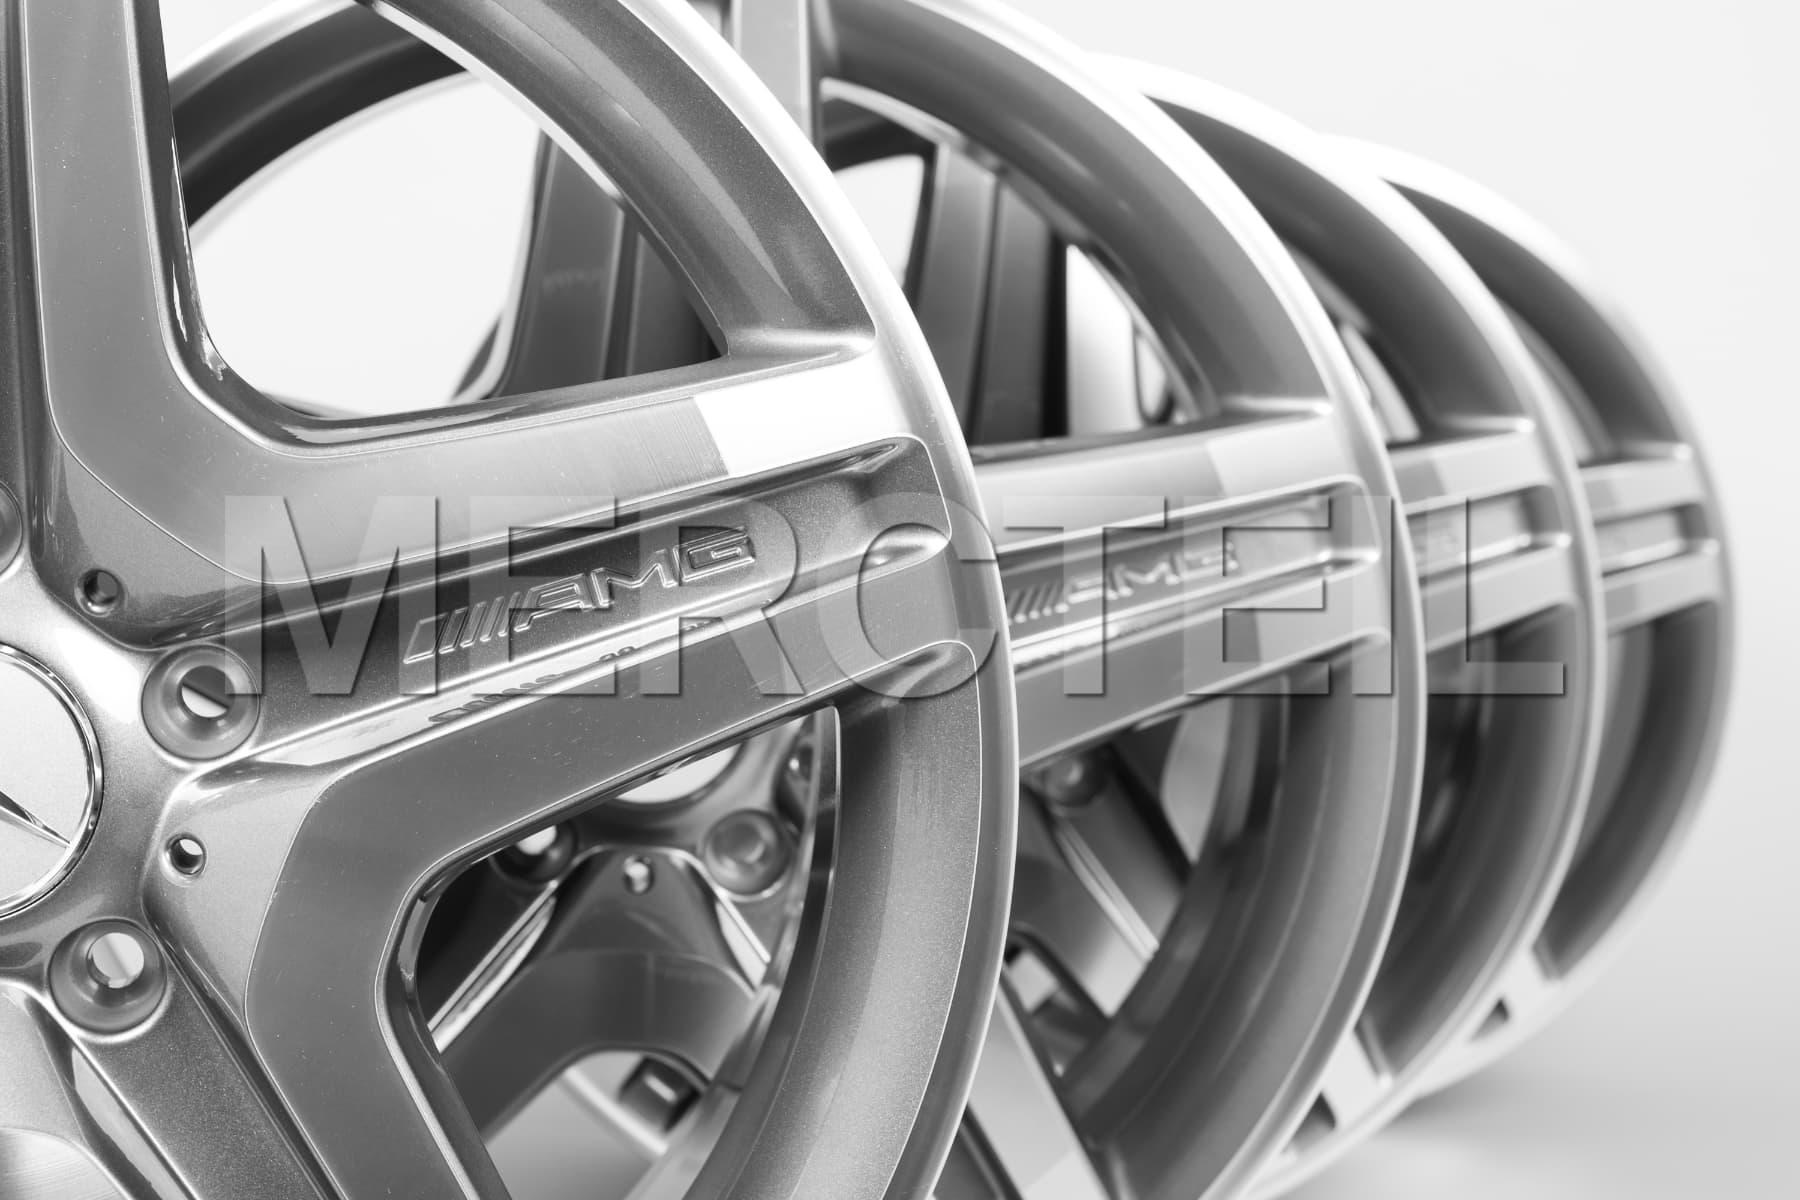 G-Class G63 AMG Alloy Wheels 20 Inch 463 Genuine Mercedes-AMG (Part number: A46340127027X21)